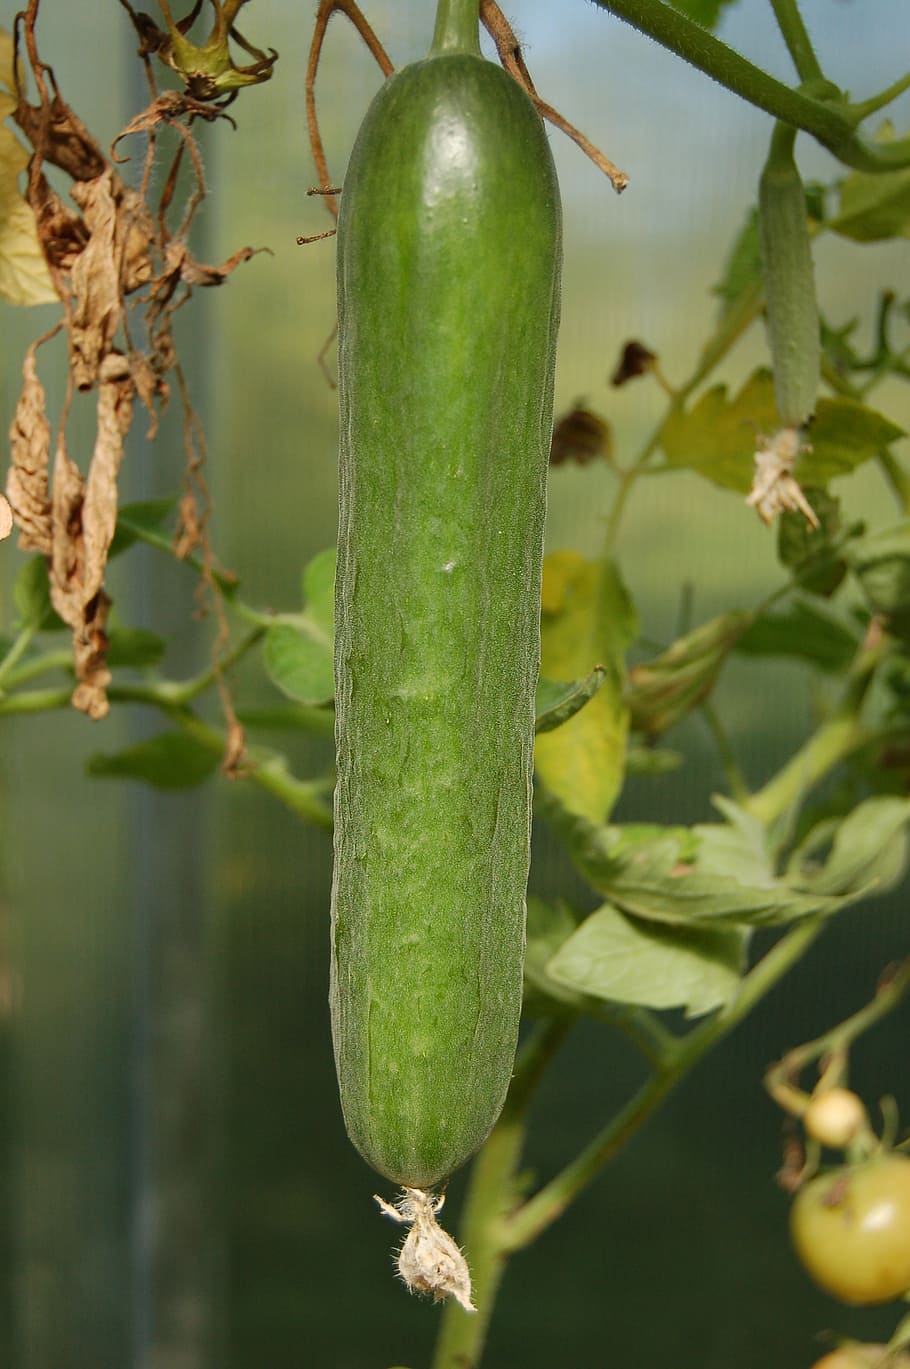 cucumbers, vegetables, cucumber, food, dacha, harvesting, pickled, harvest, plant, growth